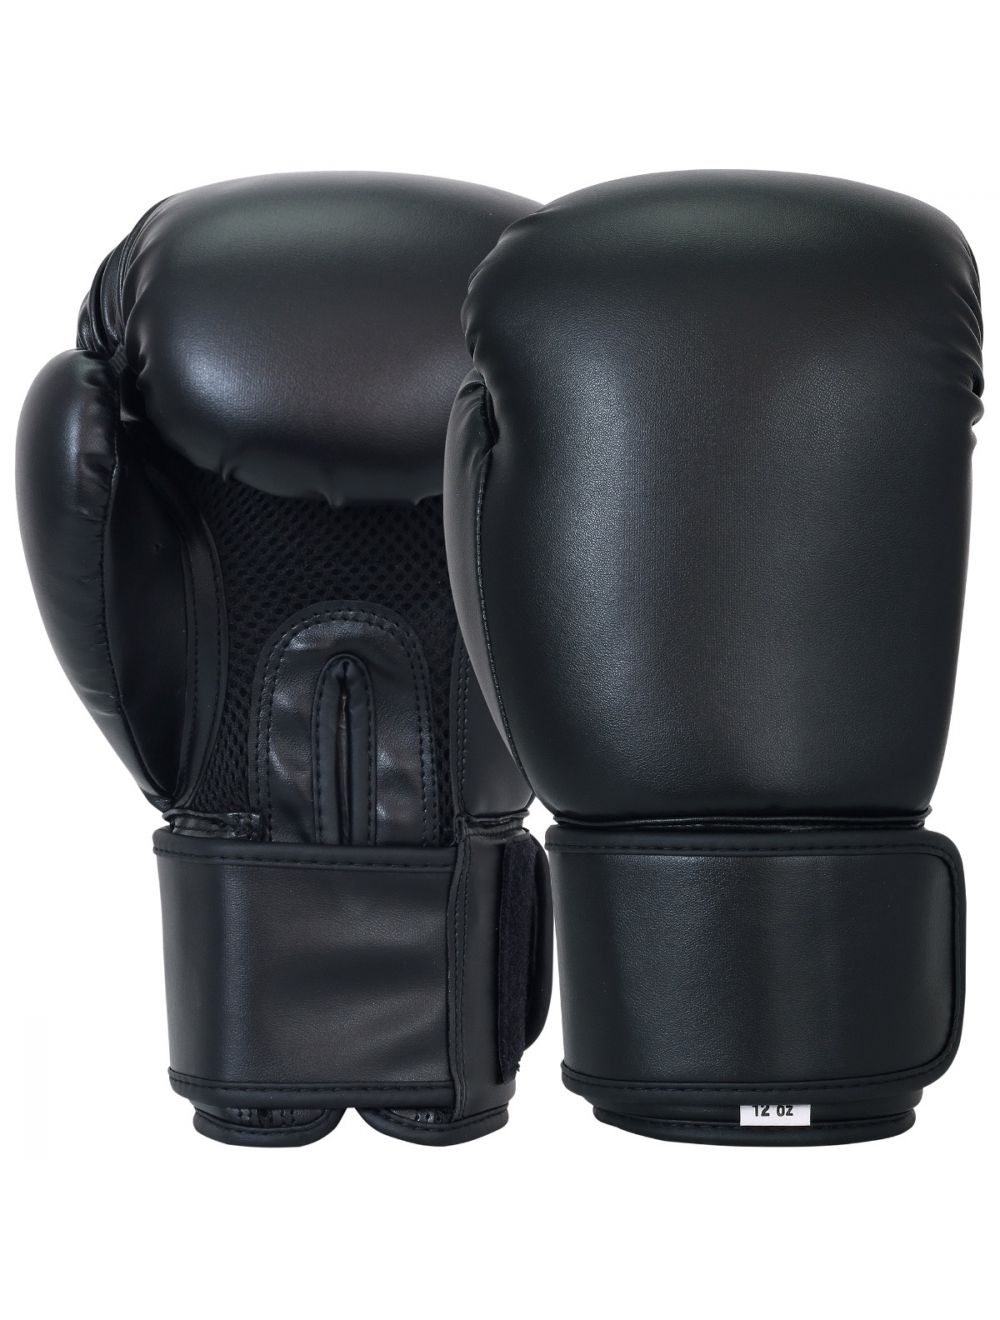 Plain Boxing Gloves Made By High Rex Leather With No Logo For Men Women Muay Thai Kickboxing And Training